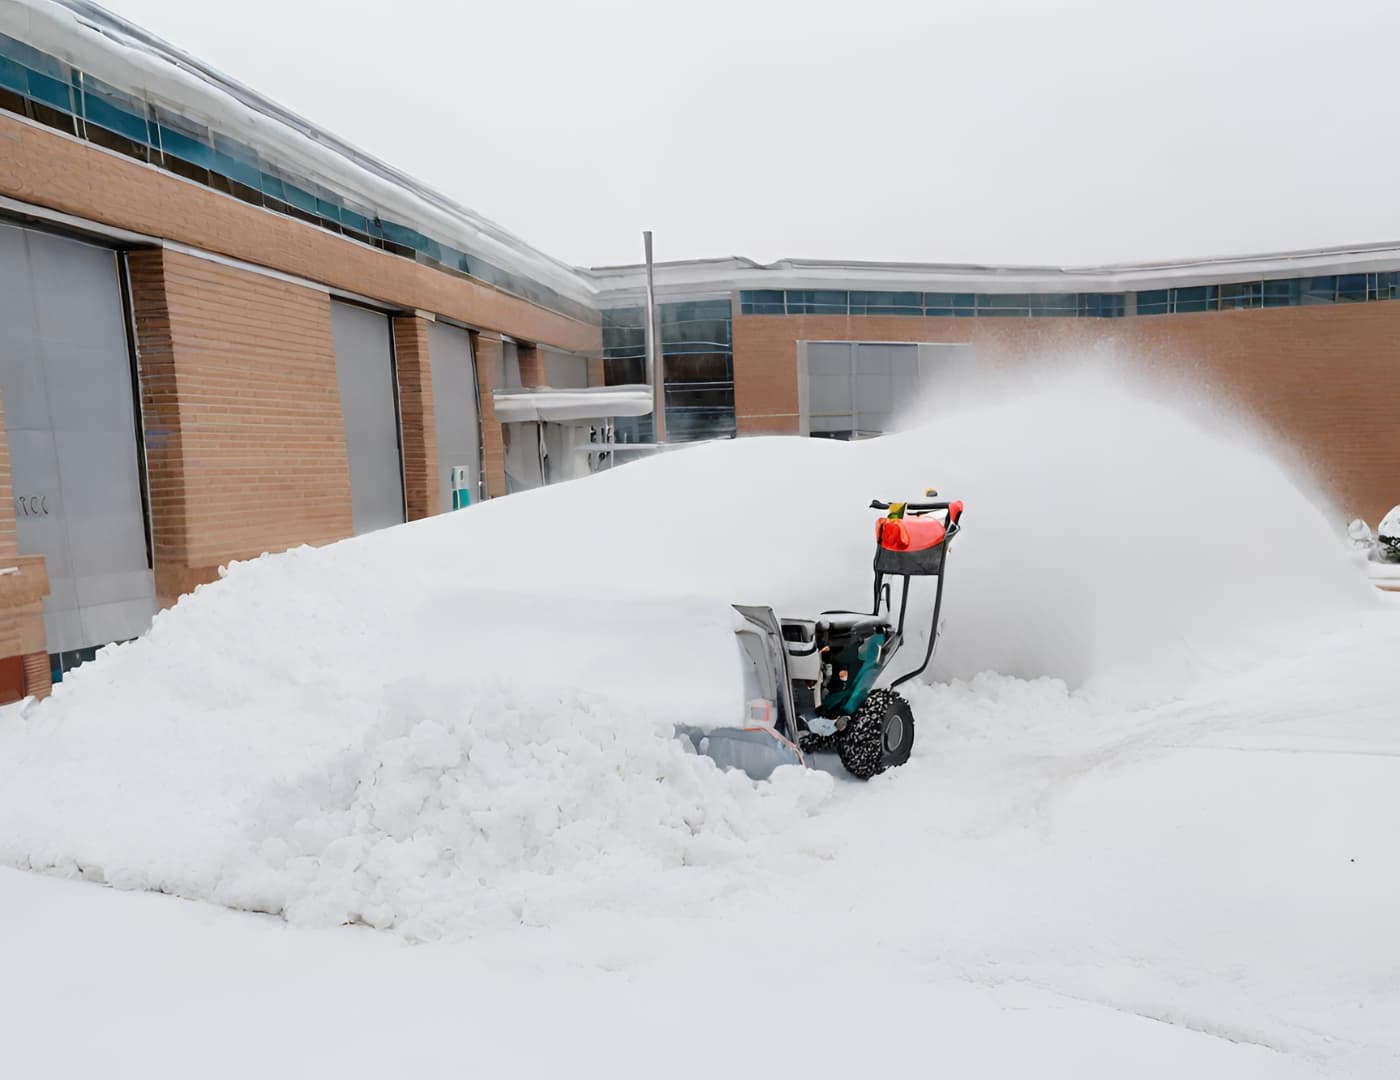 Snow Removal Pricing Models: Hourly Rates vs. Seasonal Contracts